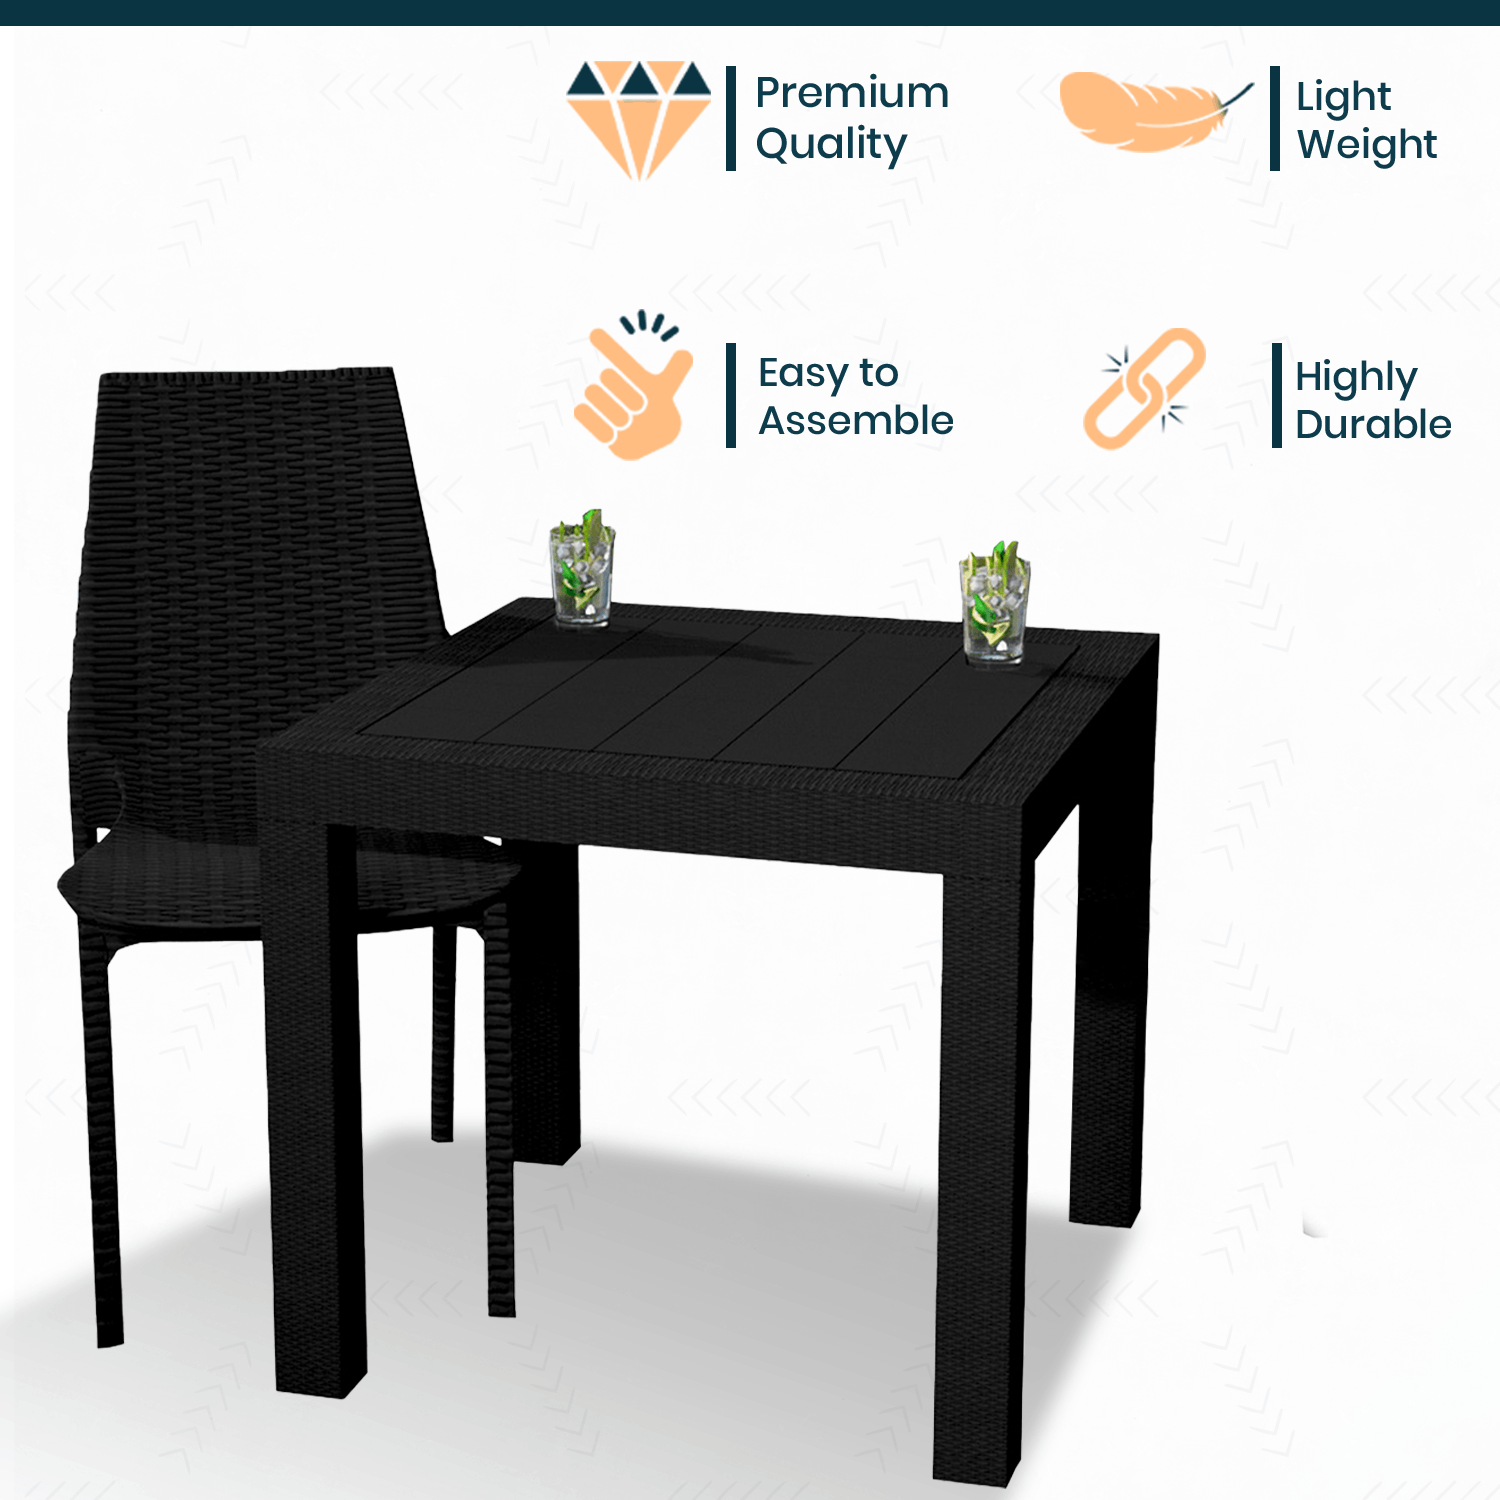 LeisureMod Kent Mid-Century Modern Weave Design 2-Piece Outdoor Patio Dining Set with Plastic Square Table and 2 Stackable Chairs for Patio, Poolside, and Backyard Garden (Black) - image 4 of 18